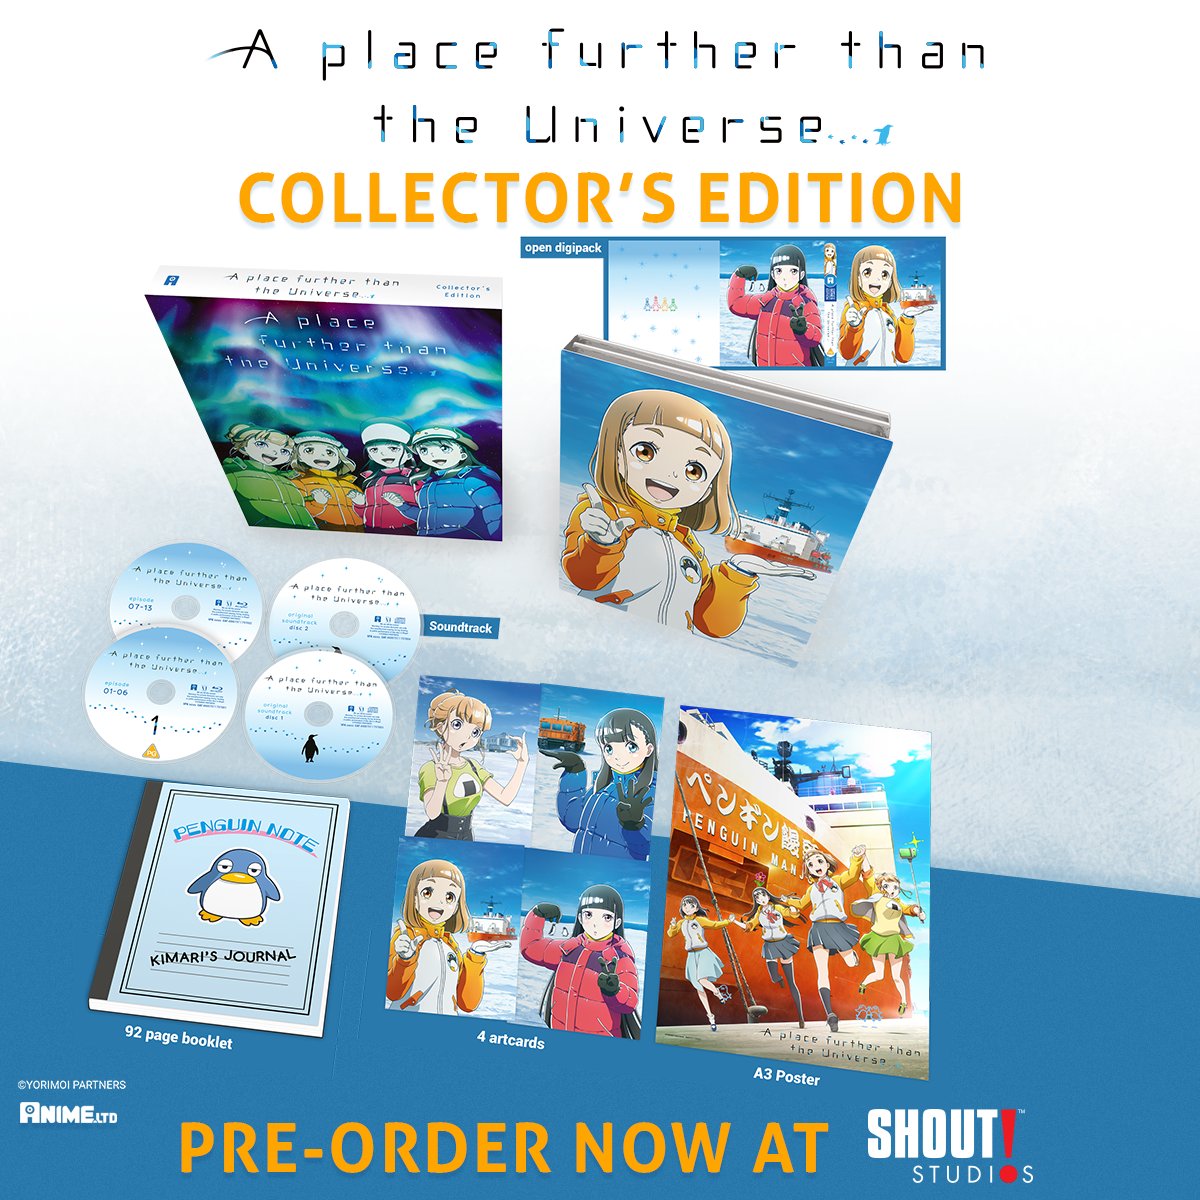 The journey of a lifetime begins for four high school girls in A PLACE FURTHER THAN THE UNIVERSE: THE COMPLETE SERIES. The full collection is available now in our store and from @AllTheAnime featuring a 92-page booklet, 4 art cards, and a poster. shoutfactory.com/products/a-pla…